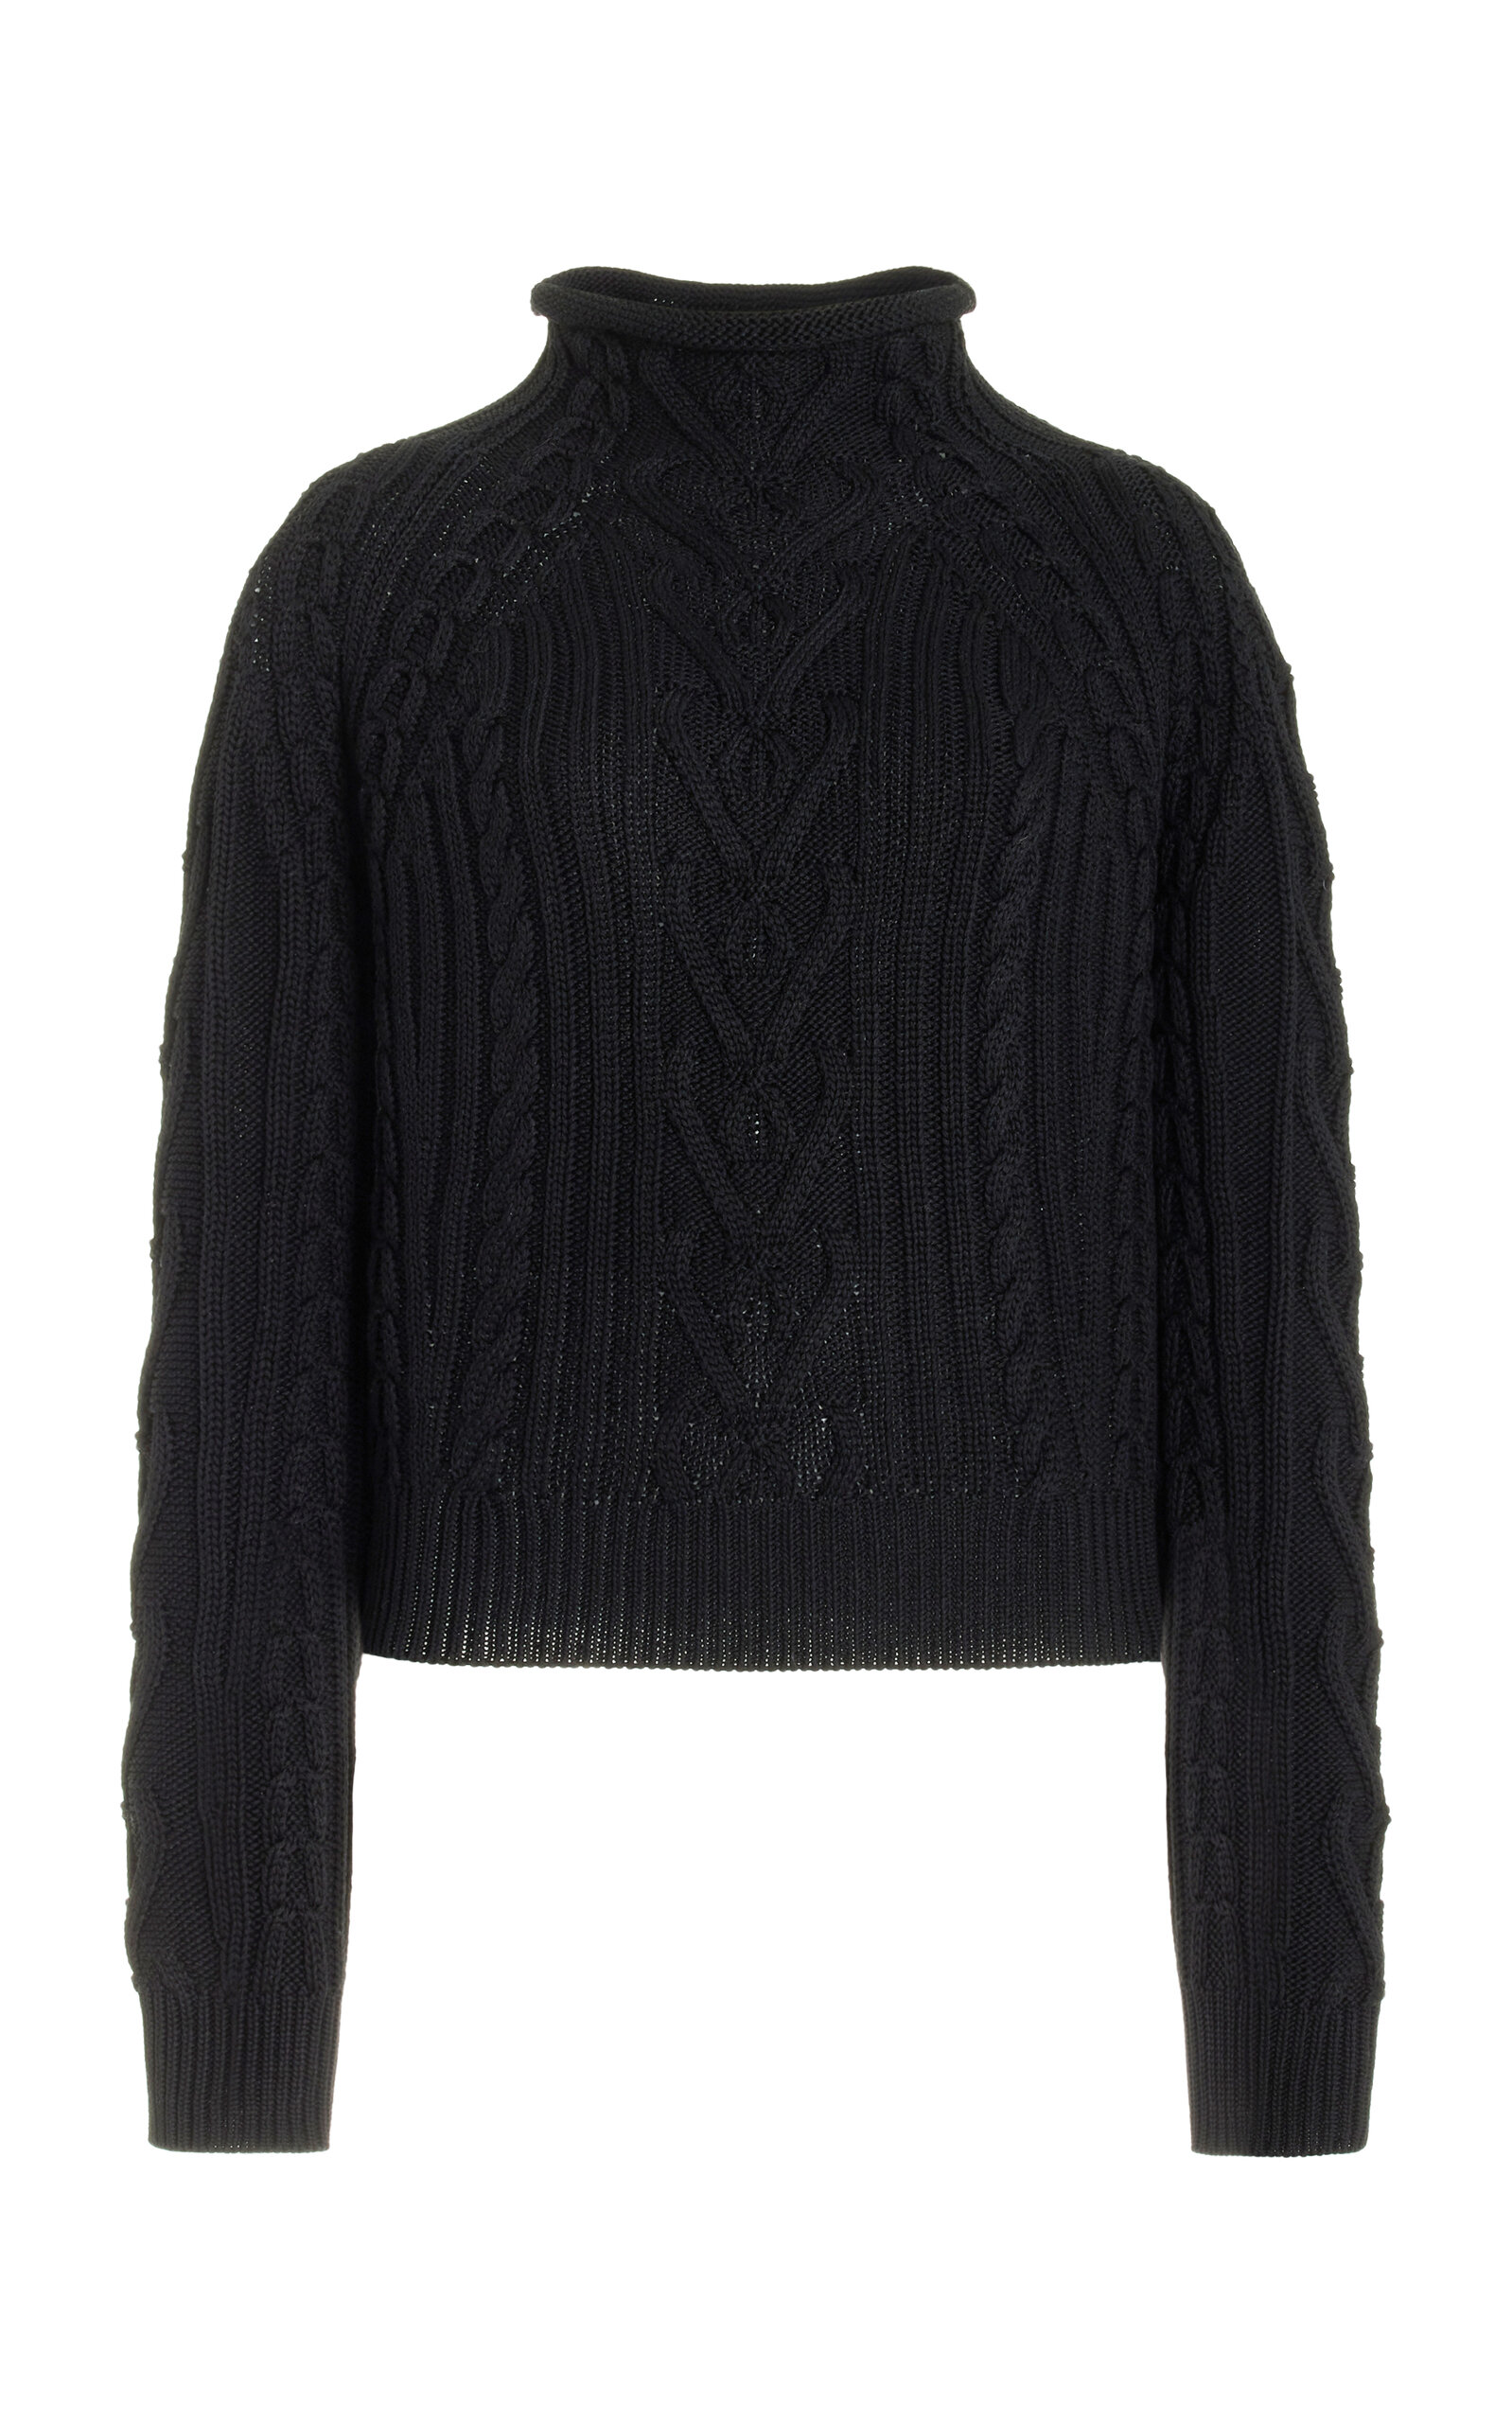 Aran Cable-Knit Cotton Sweater